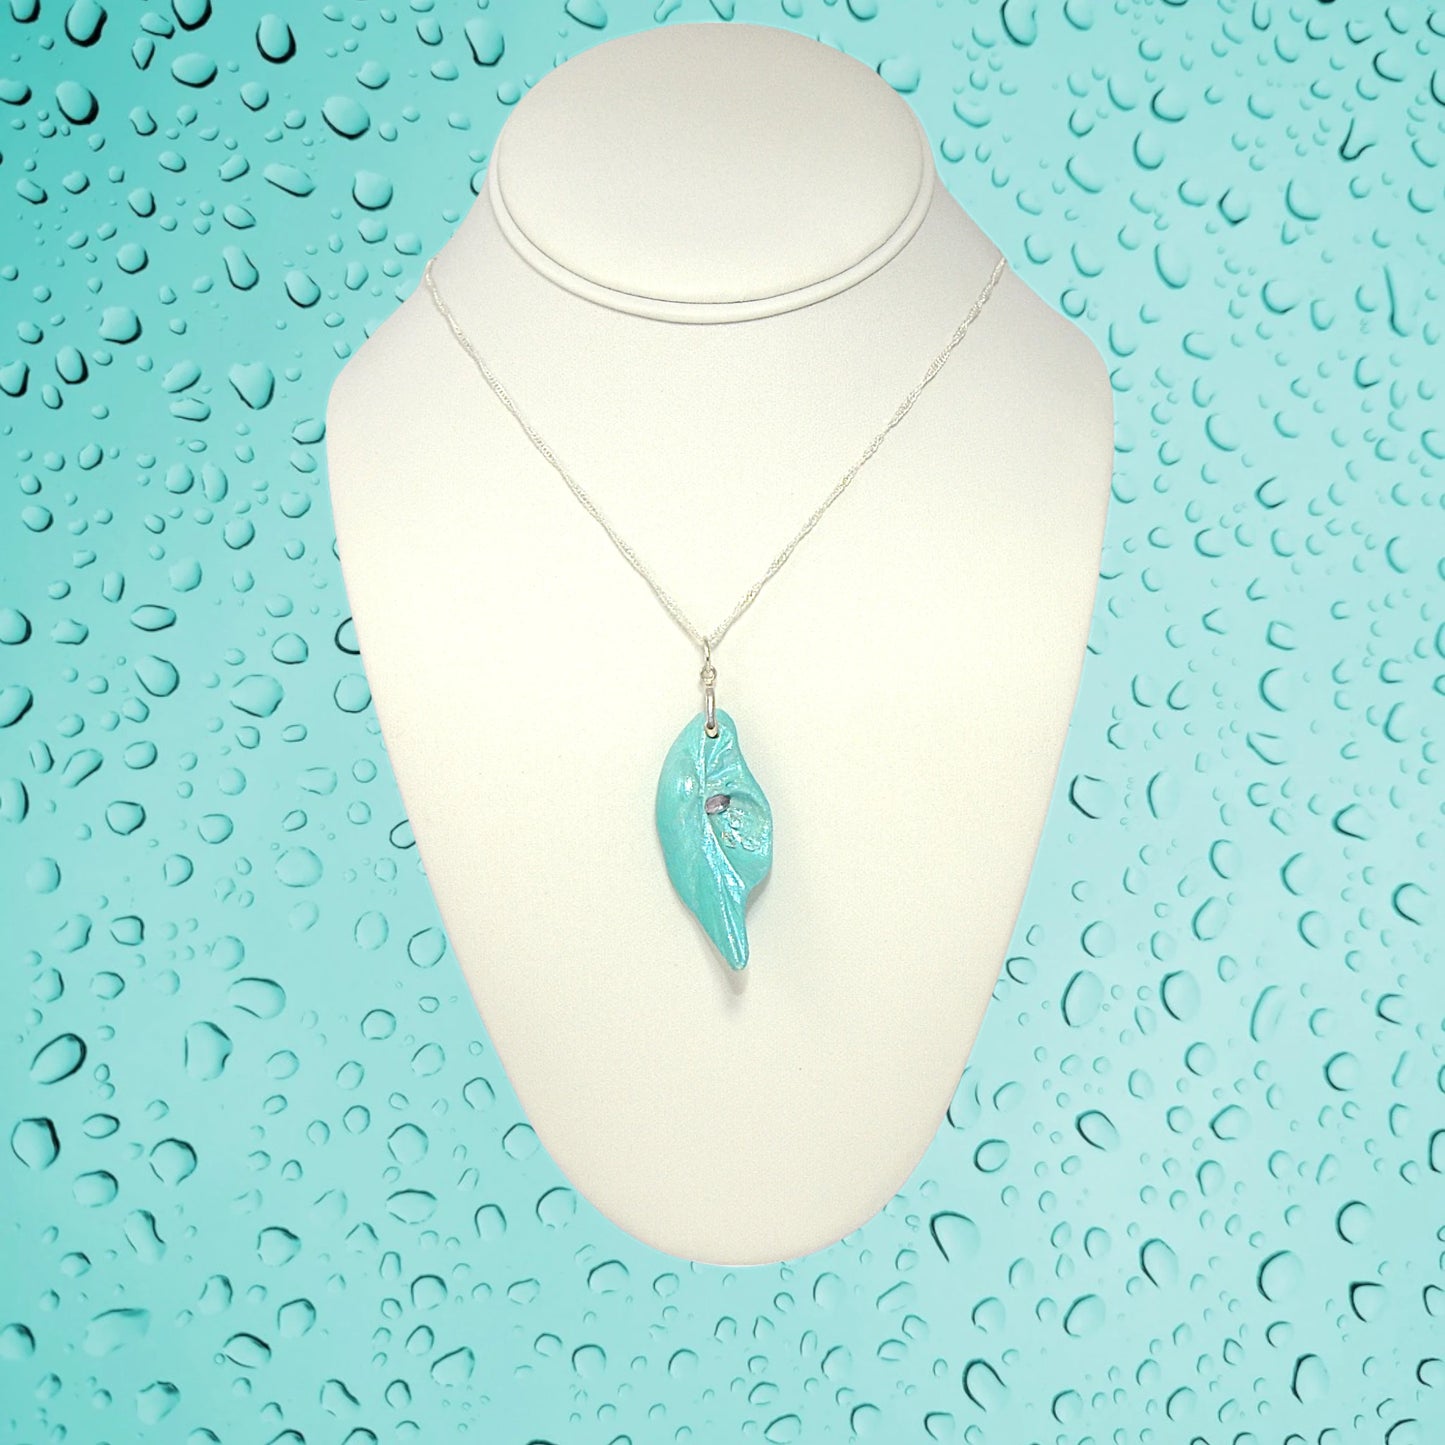 Violet Light is a natural seashell pendant with a rose cut Amethyst Gemstone and three Herkimer diamonds. The pendant is shown on a white necklace displayer with water drops on a turquoise background.